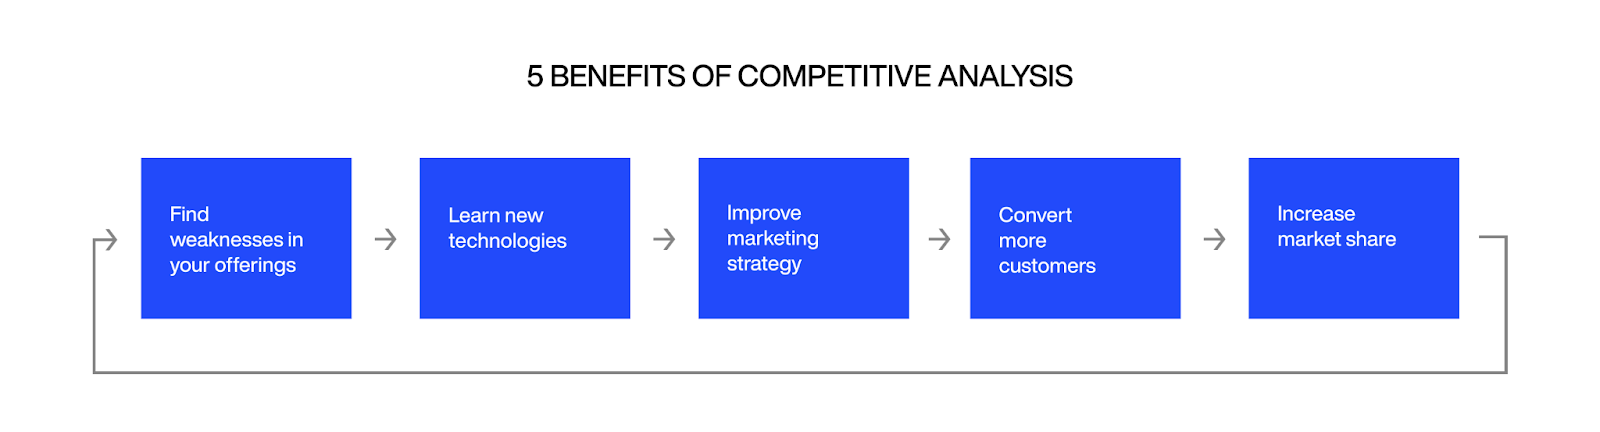 5 benefits of competitive analysis